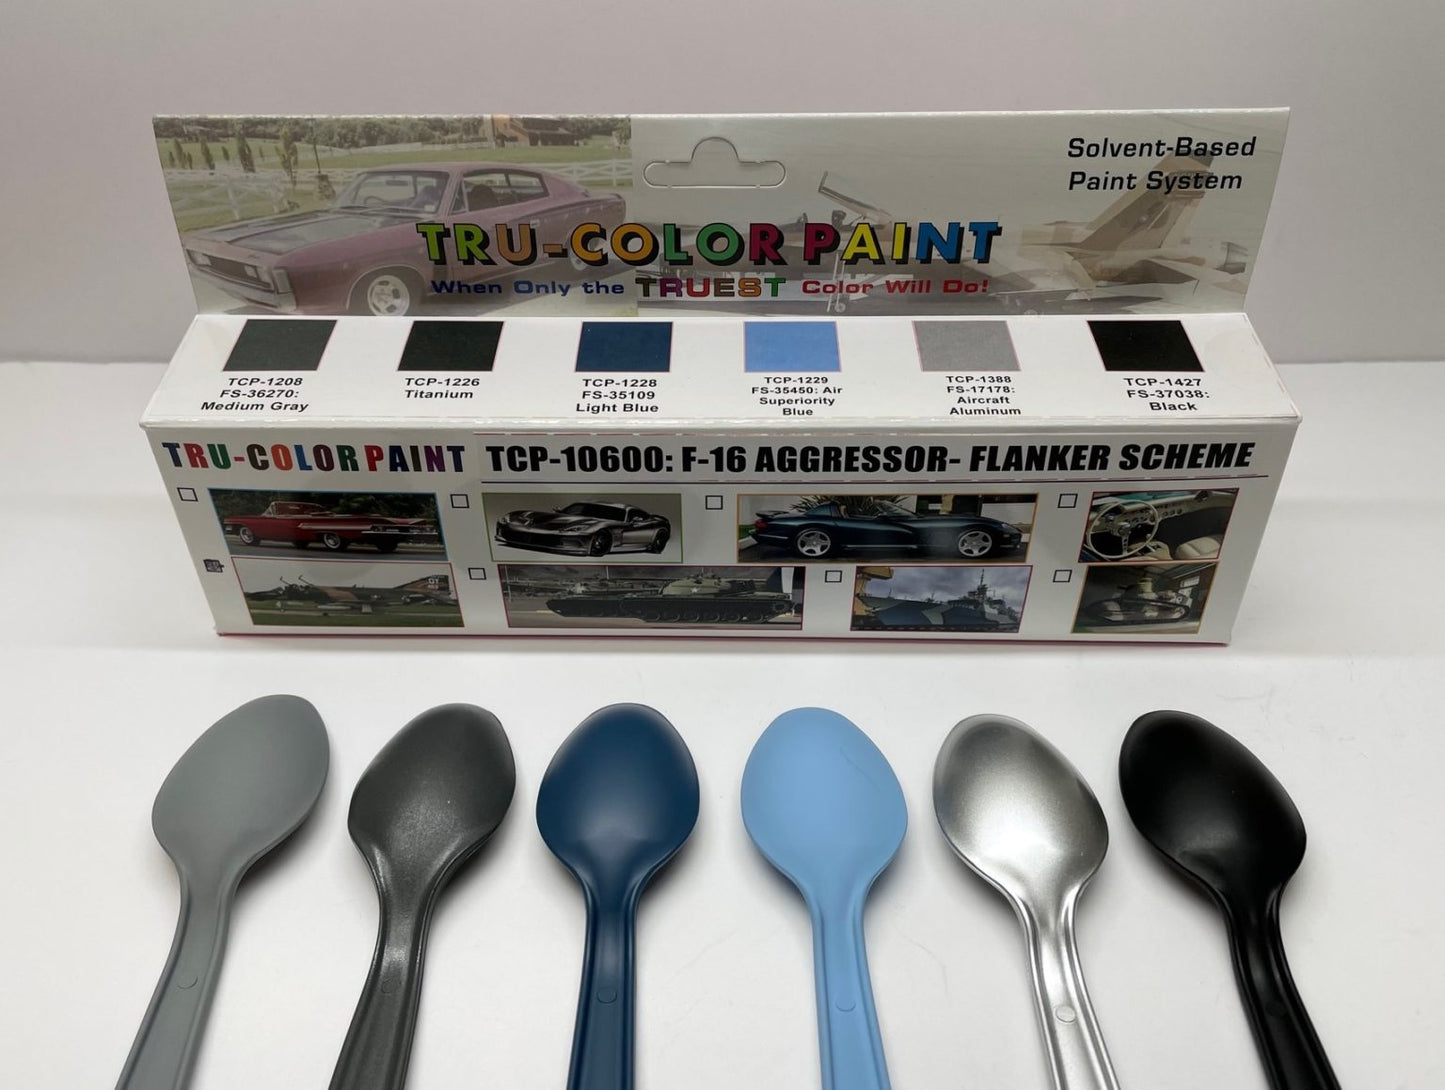 painting with stainless steel paint – The Quiet Cruiser